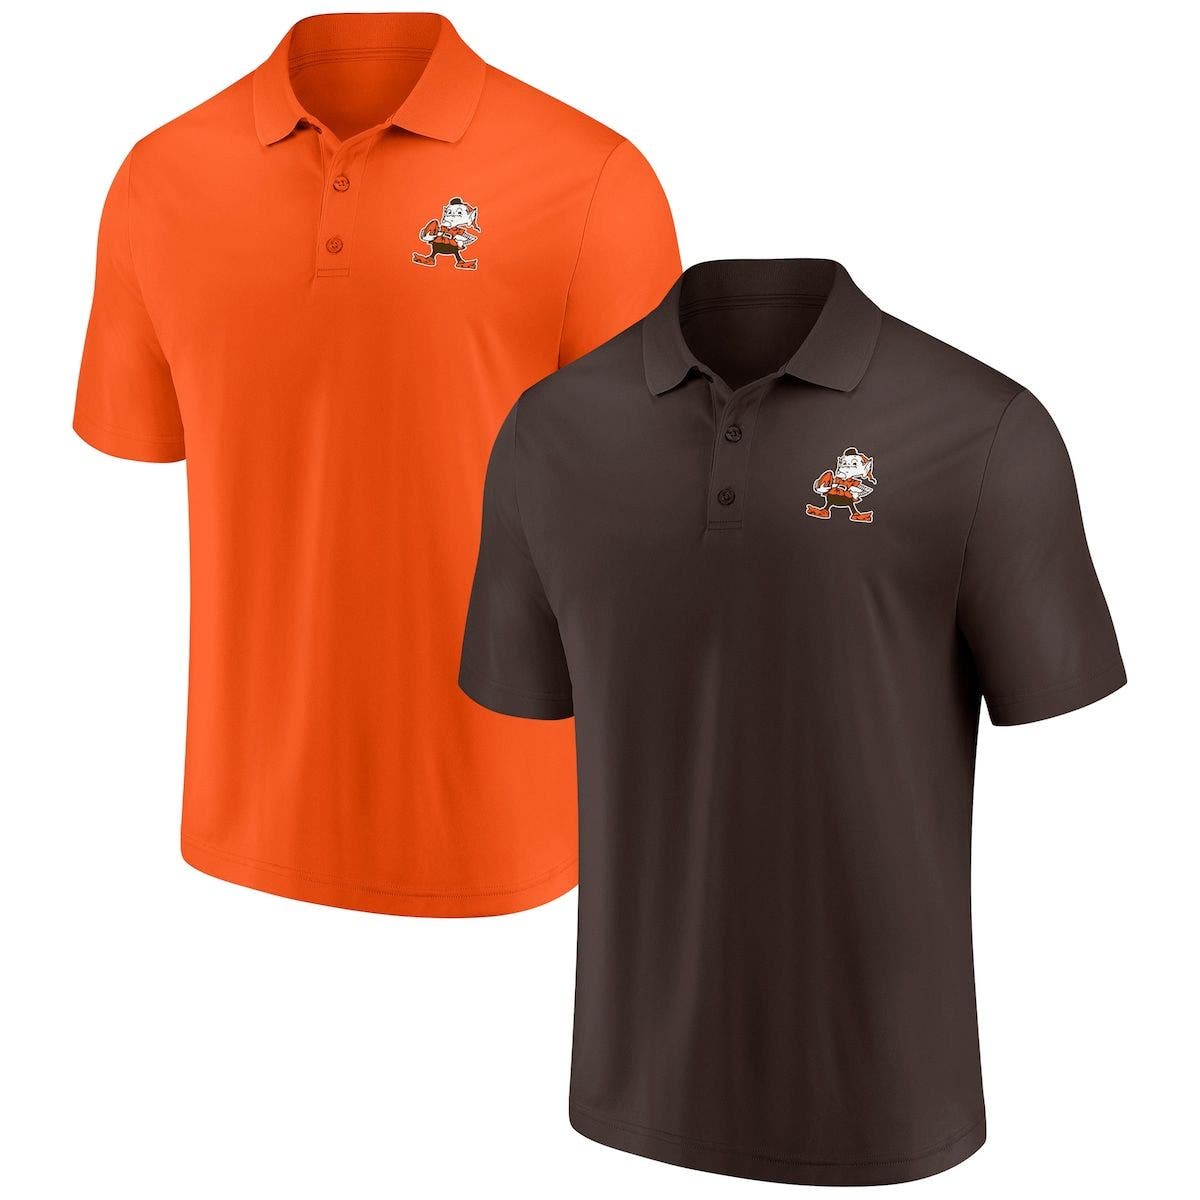 Men's Brown Polo Shirts | Nordstrom